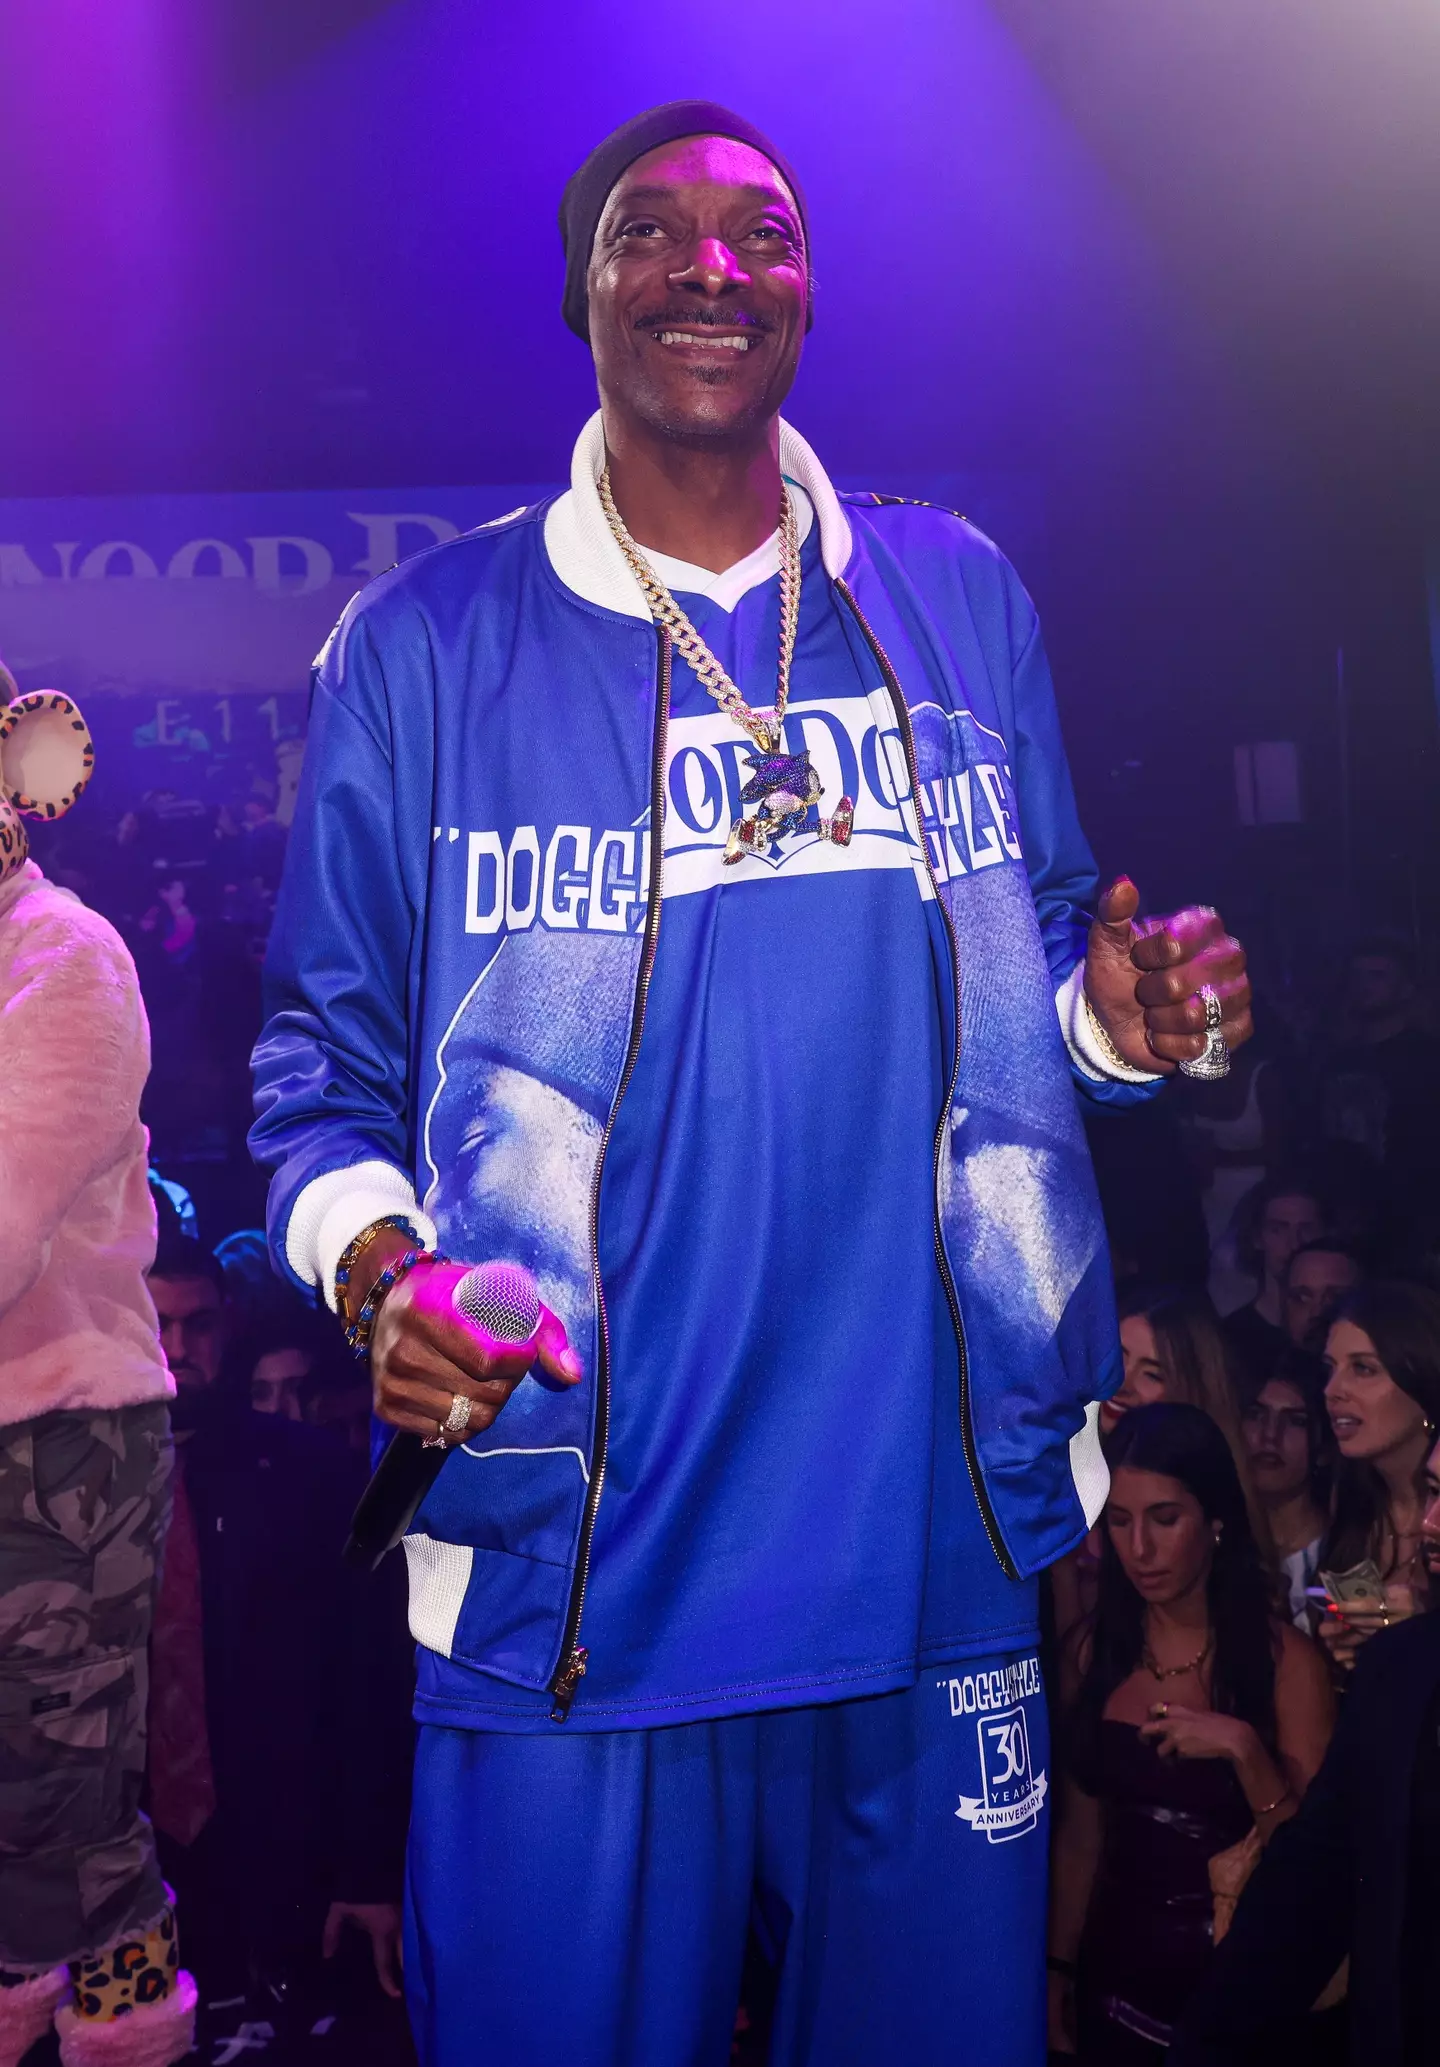 Snoop revealed he wasn't 'quitting' after all.